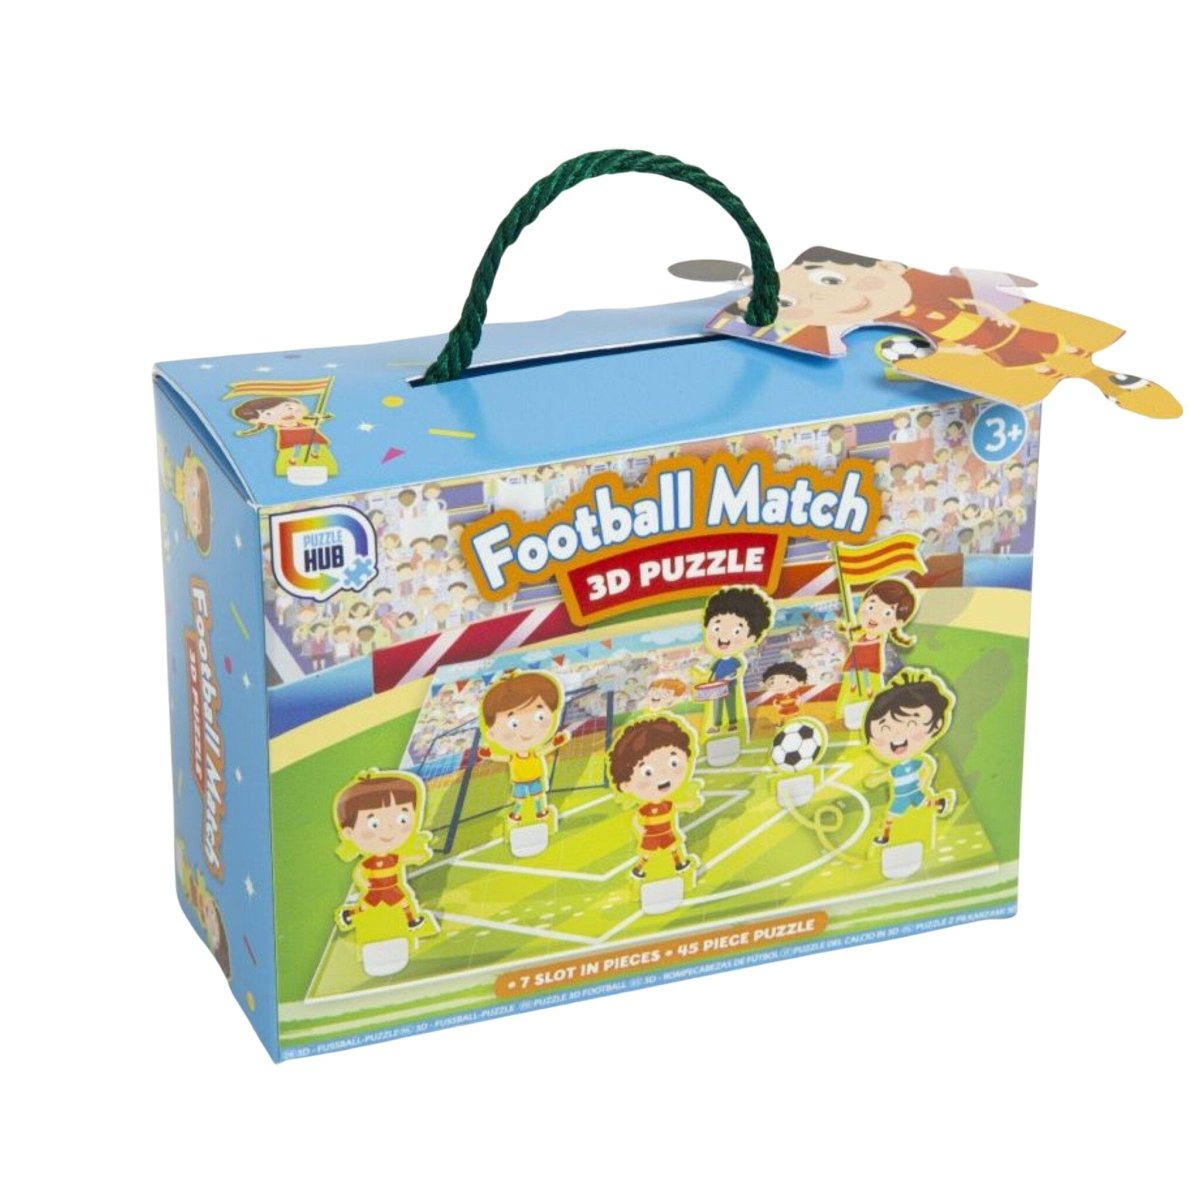 Football Match 3D Puzzle - Kids Party Craft